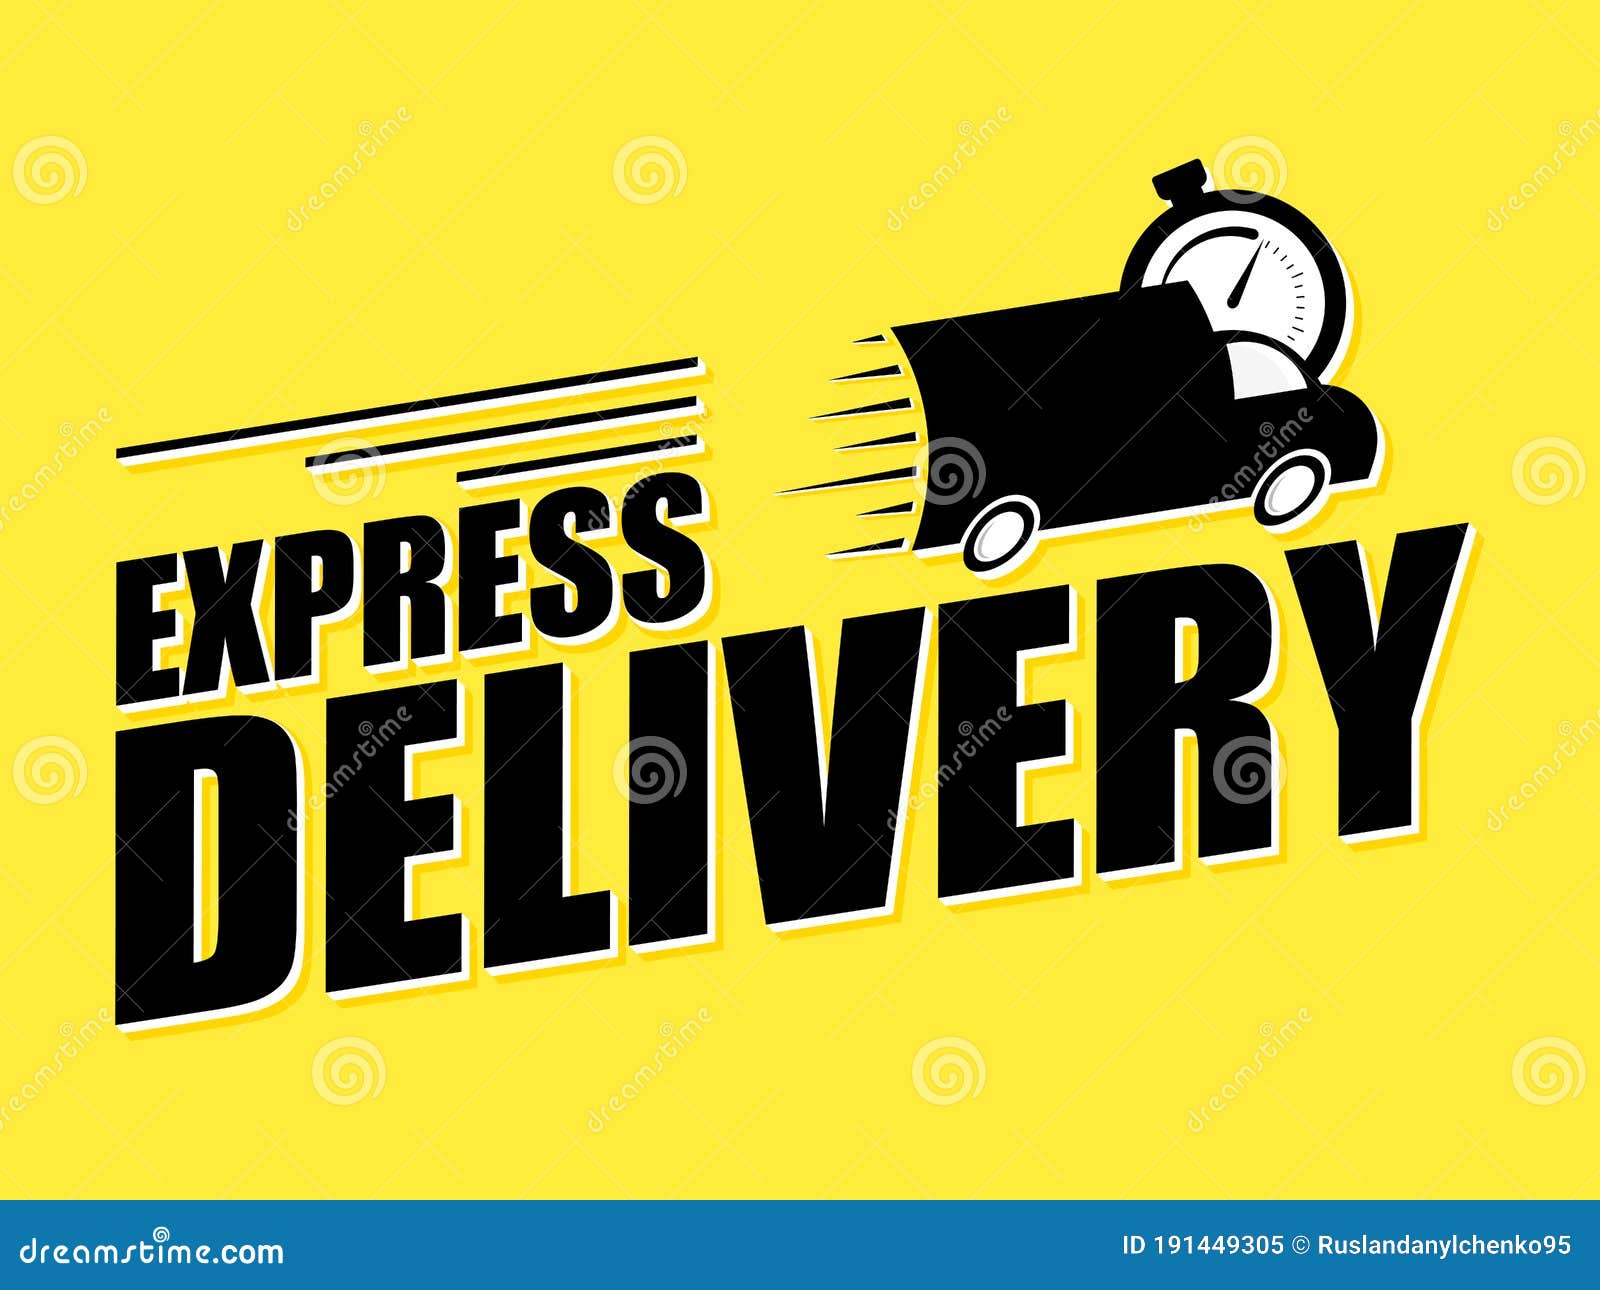 express delivery concept icon. mini ven with stopwatch icon on yellow background